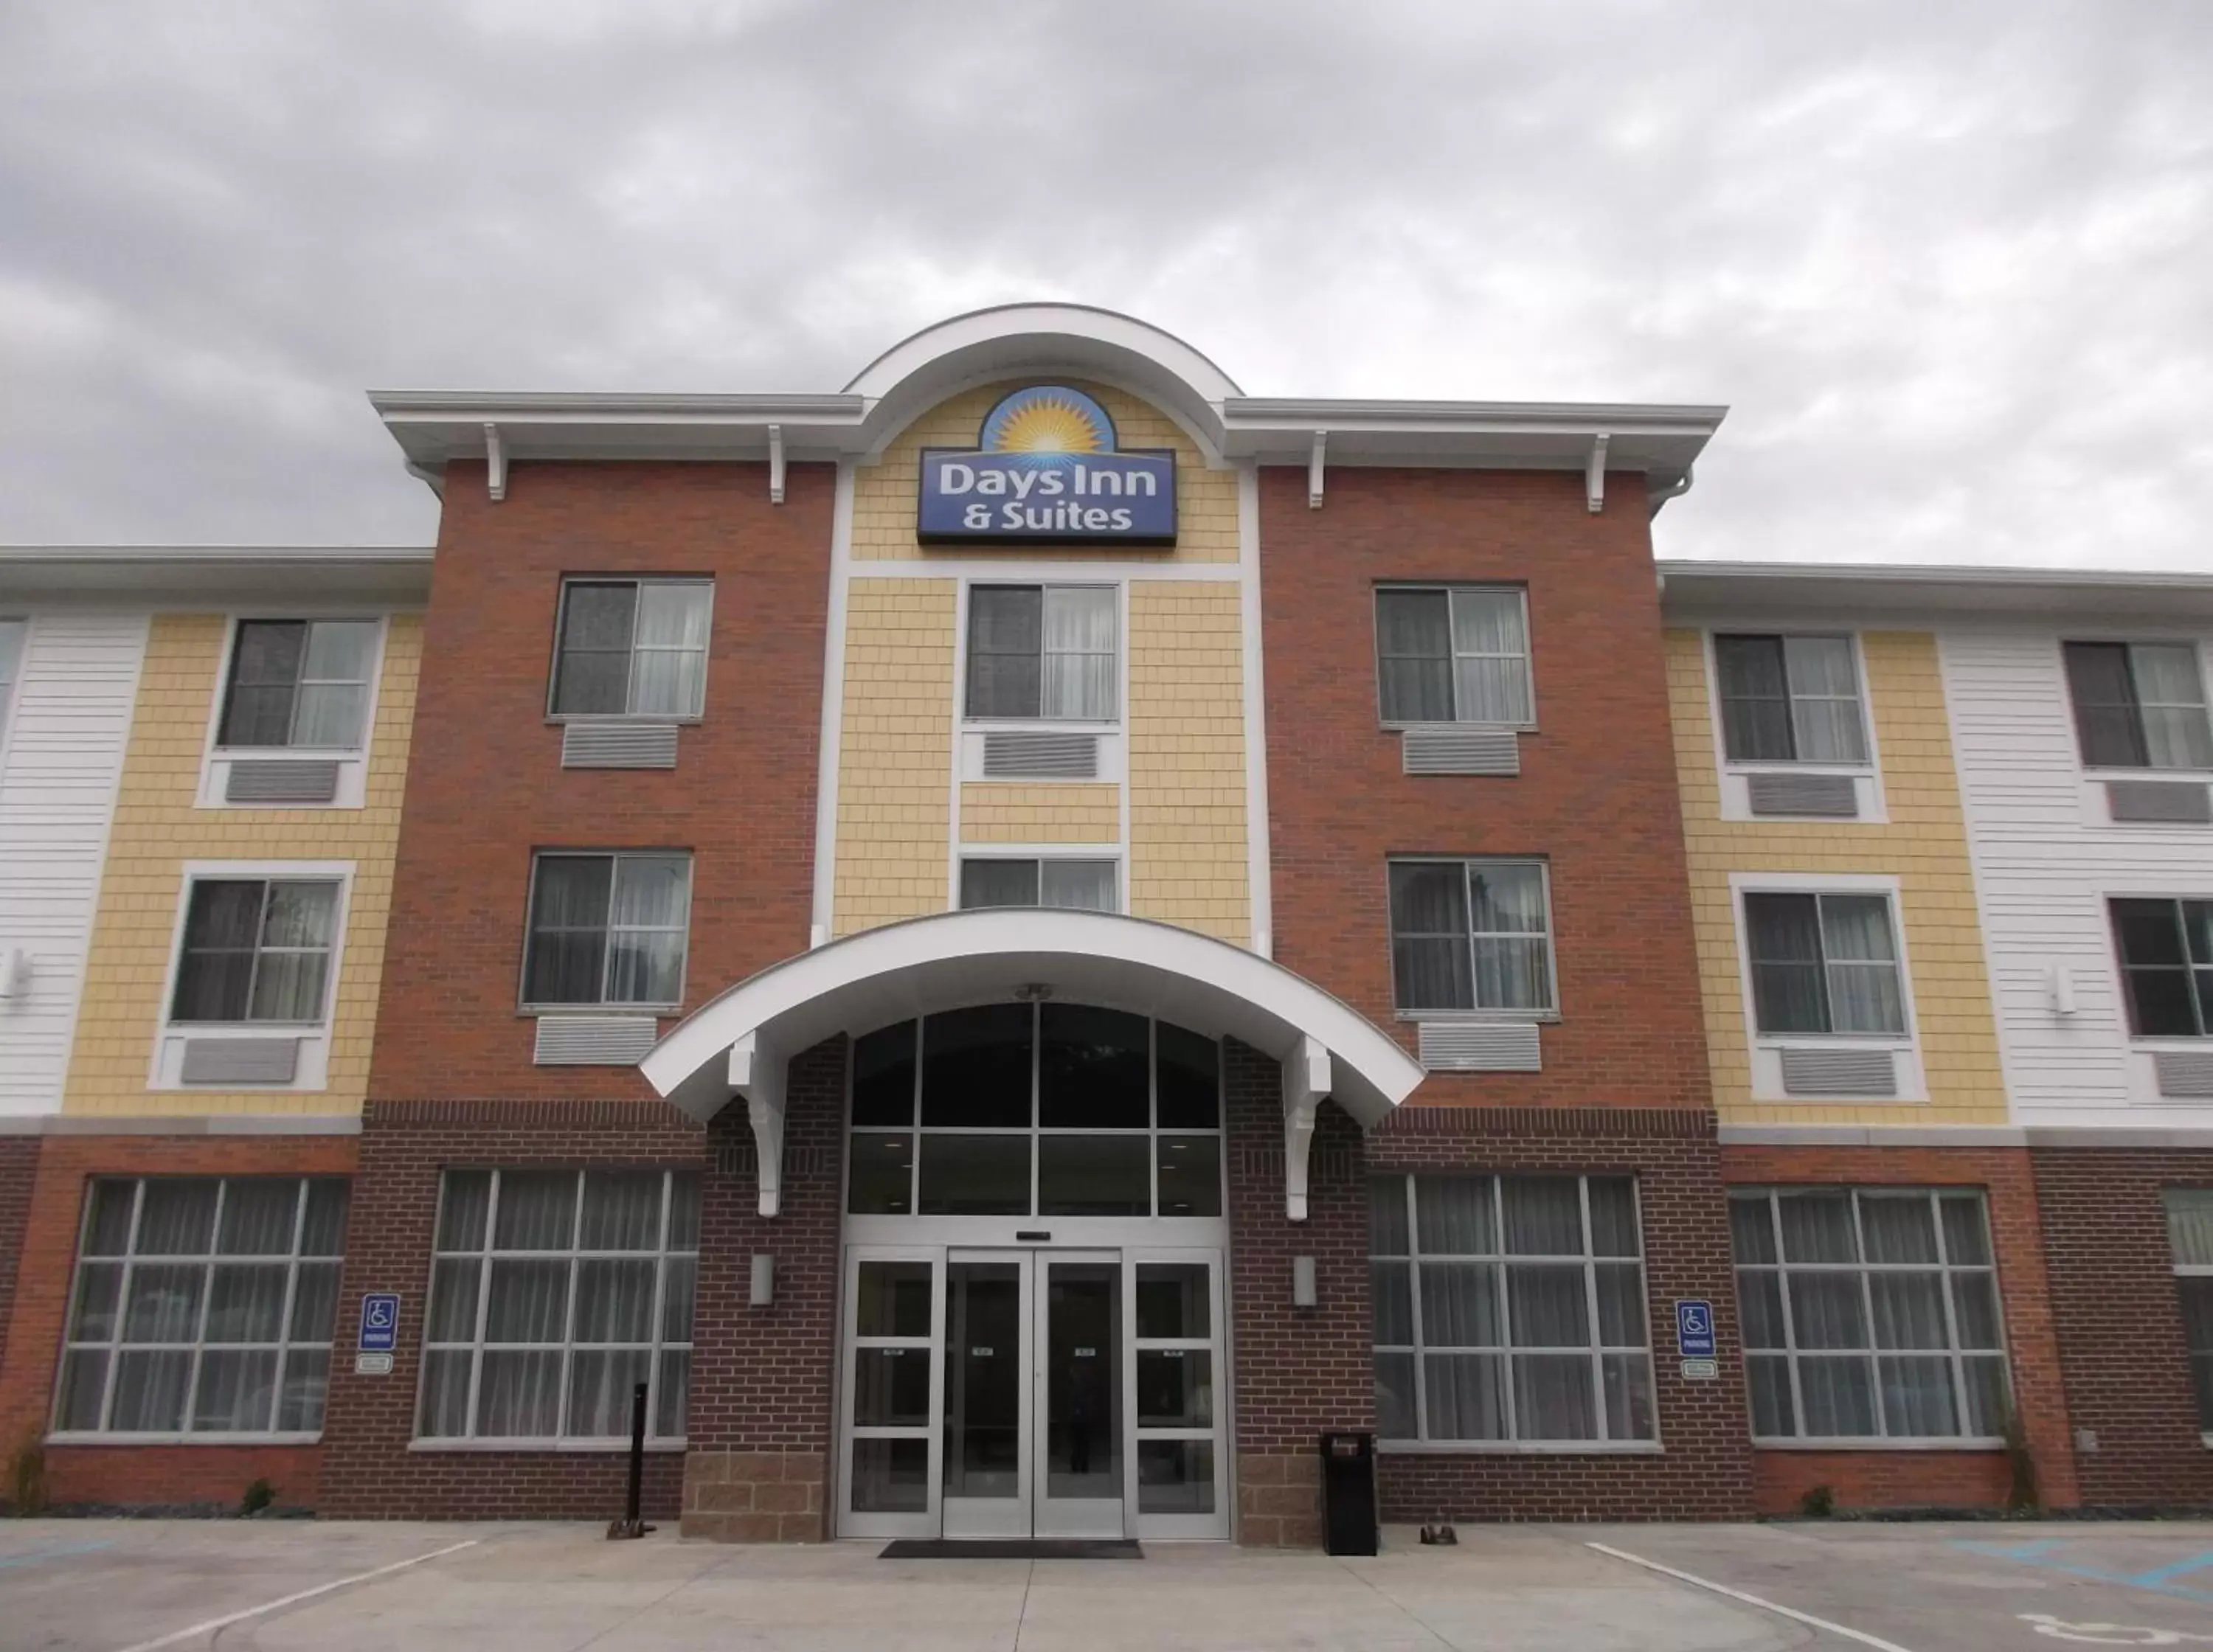 Property Building in Days Inn & Suites by Wyndham Belmont